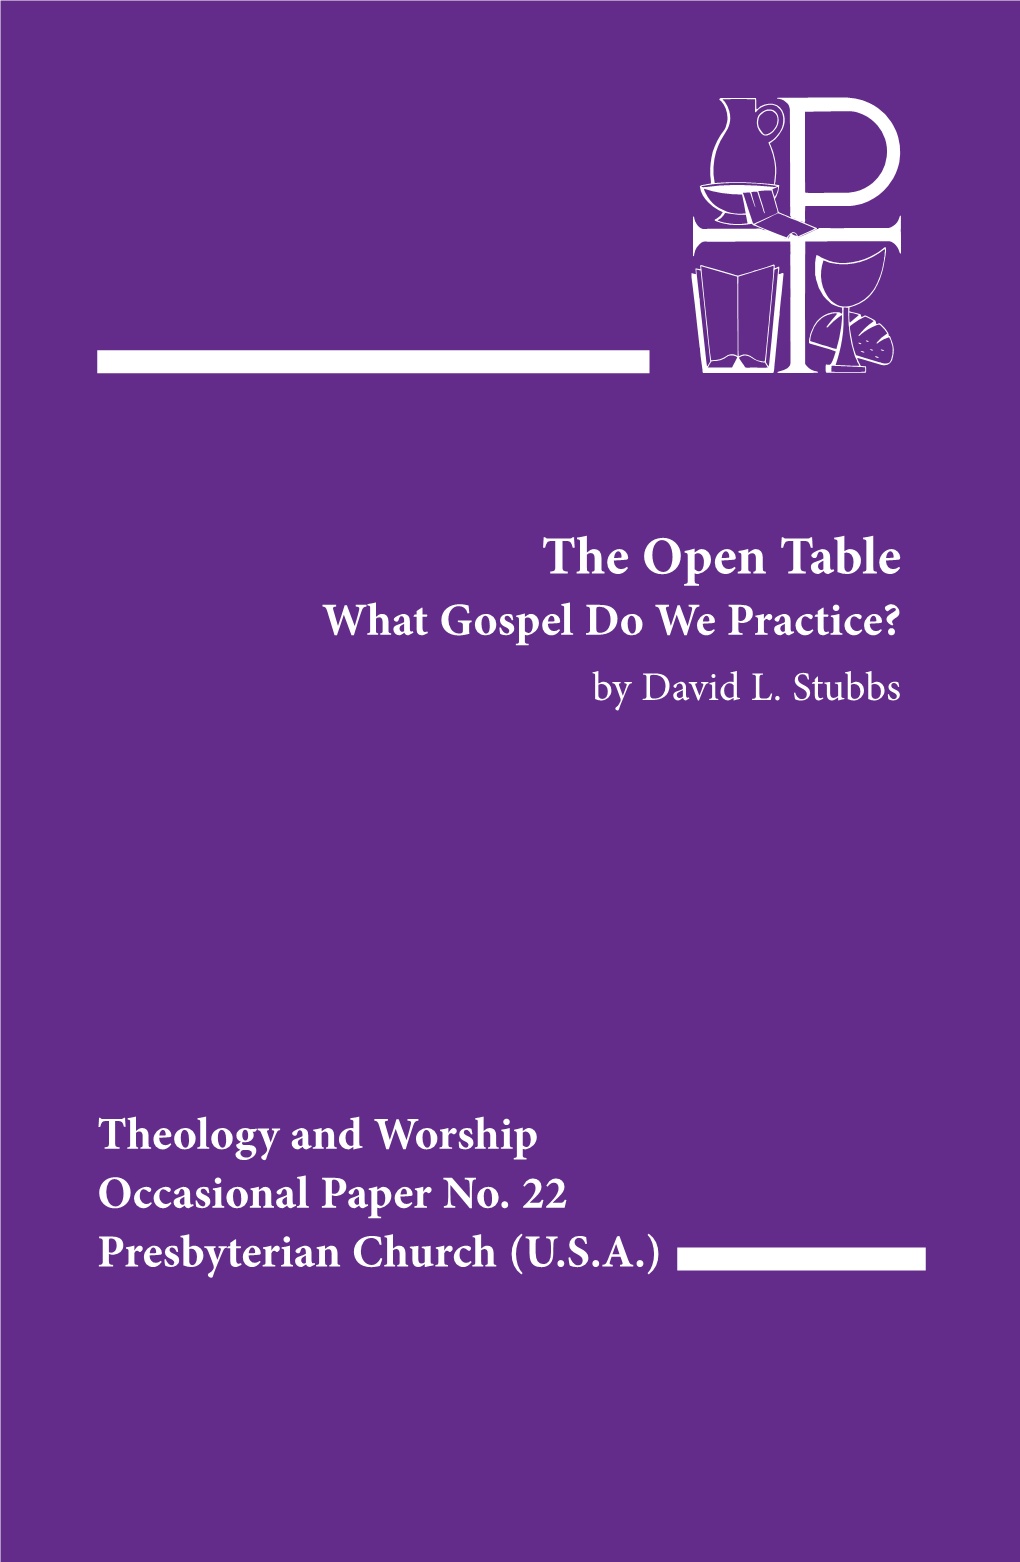 The Open Table What Gospel Do We Practice? by David L